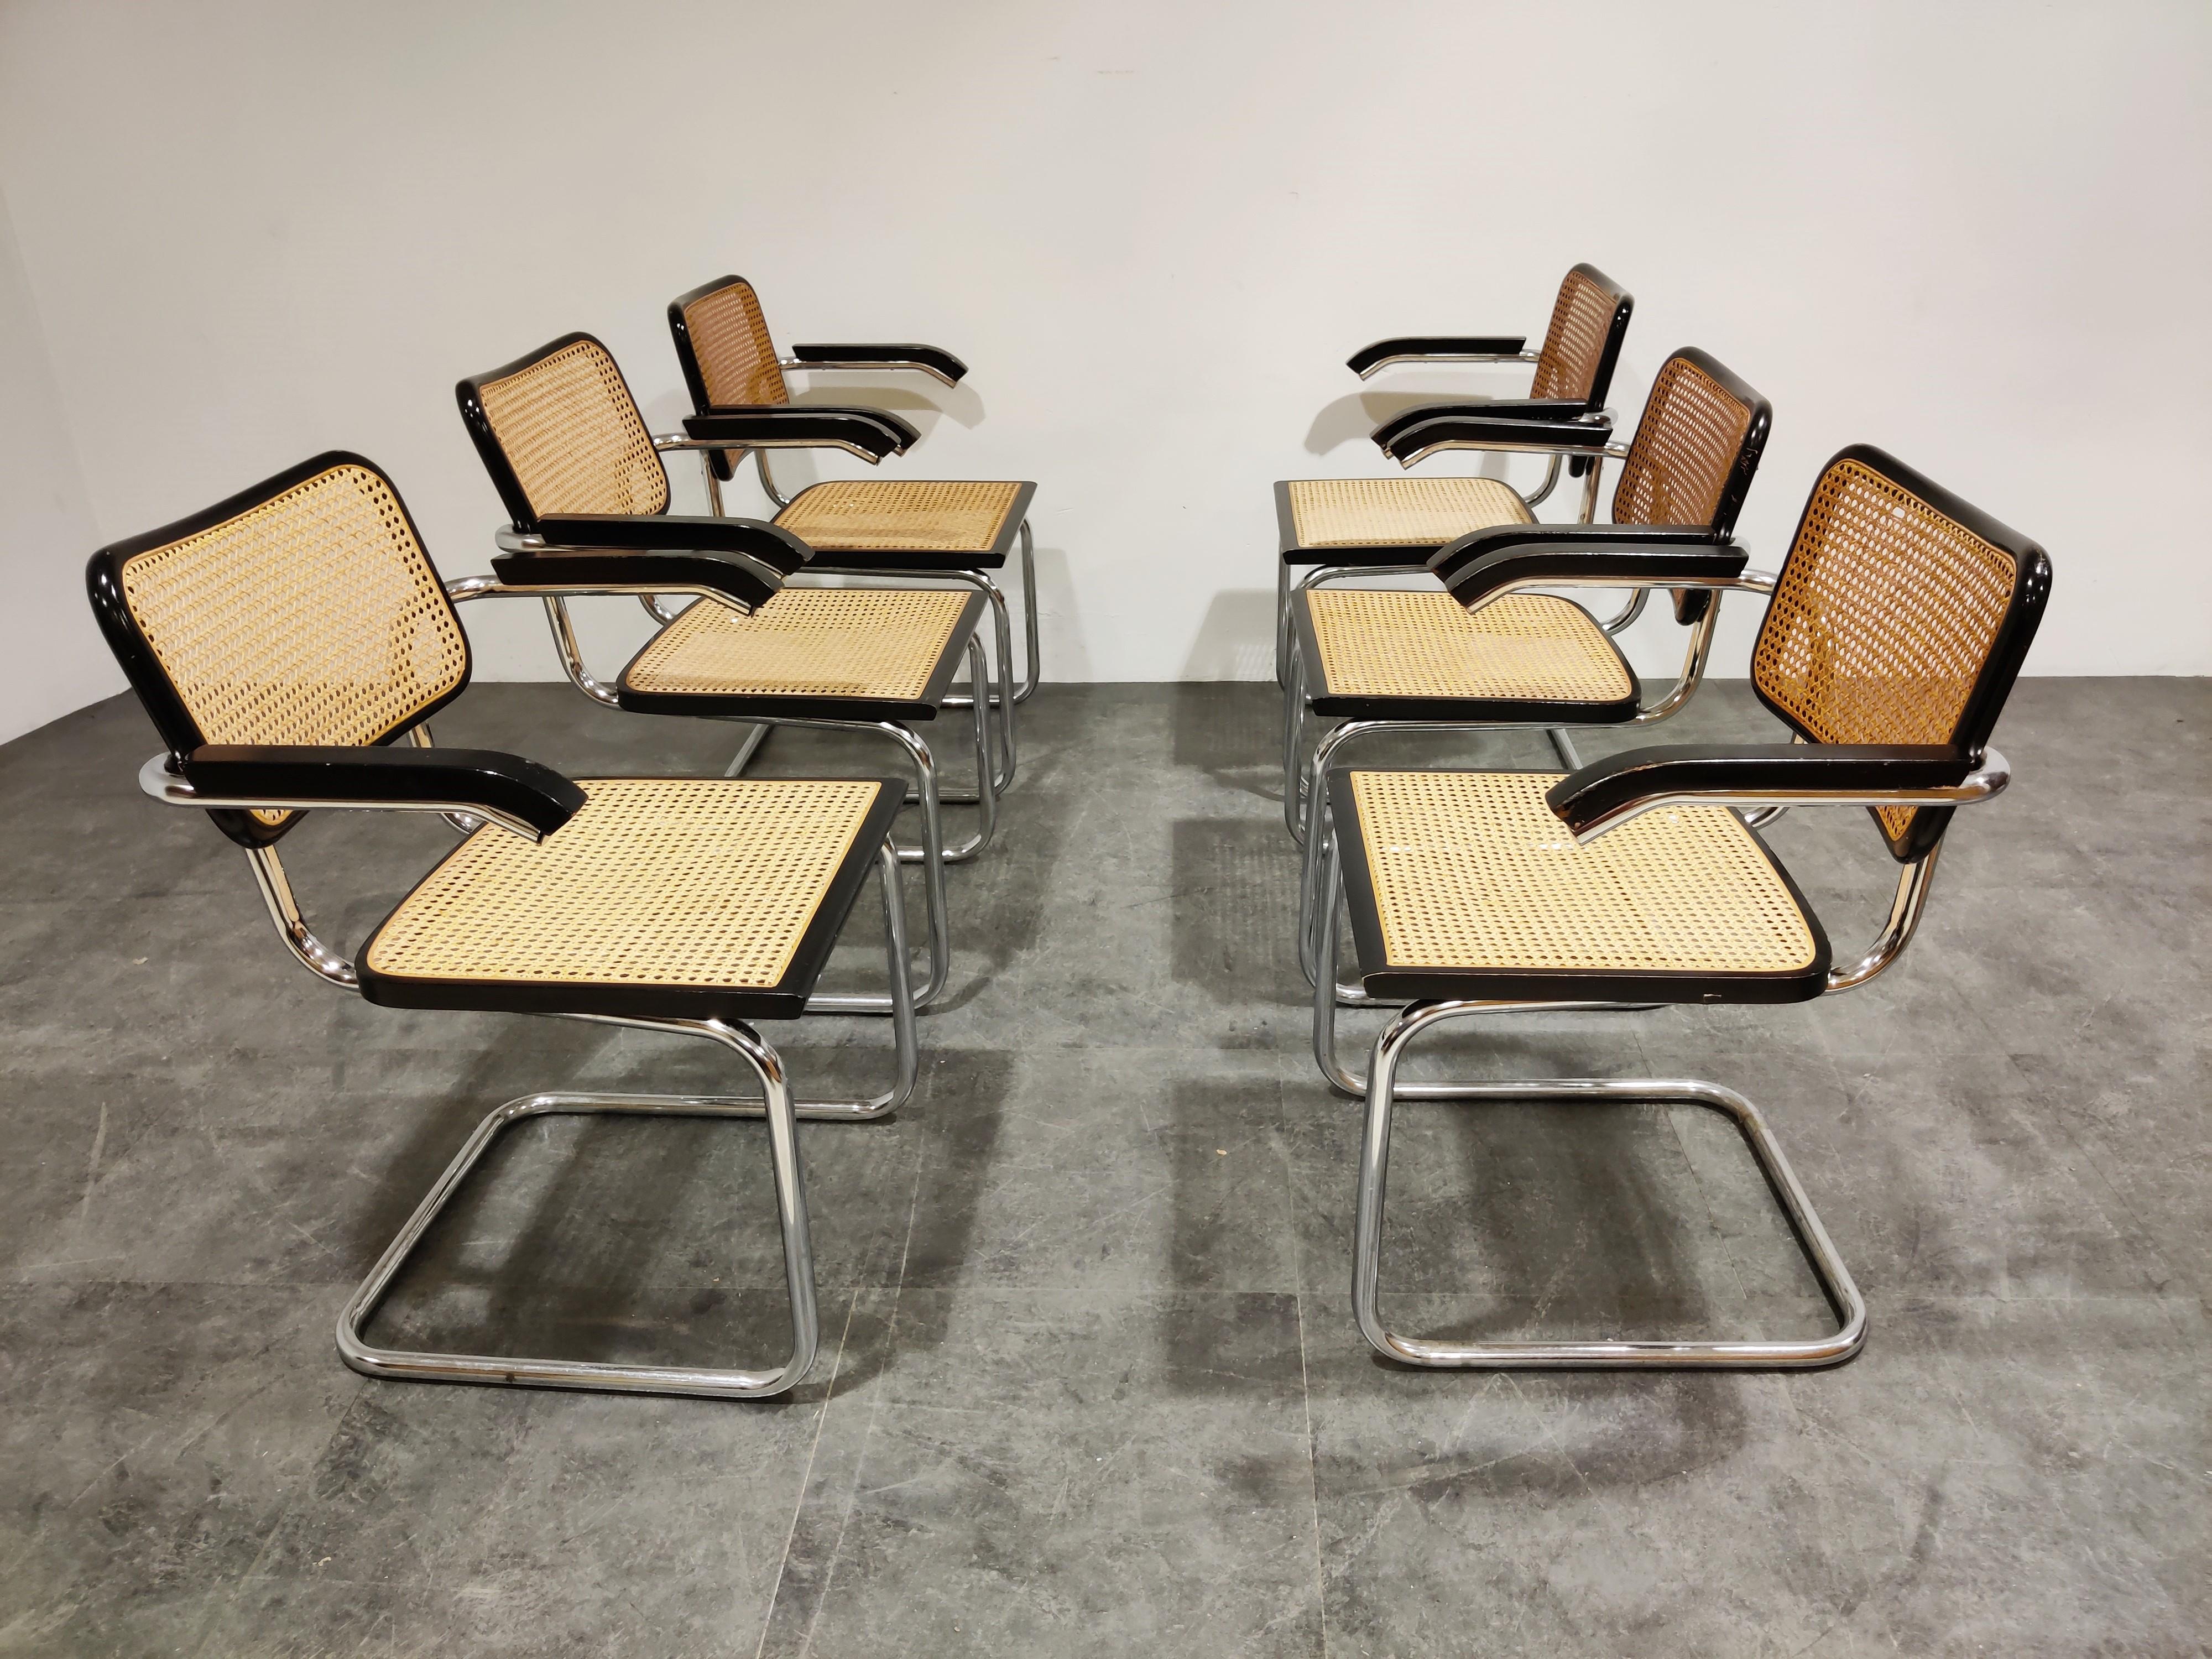 Italian Vintage Marcel Breuer Cesca B64 Chairs, Made in Italy, 1970s 'Set of 6'